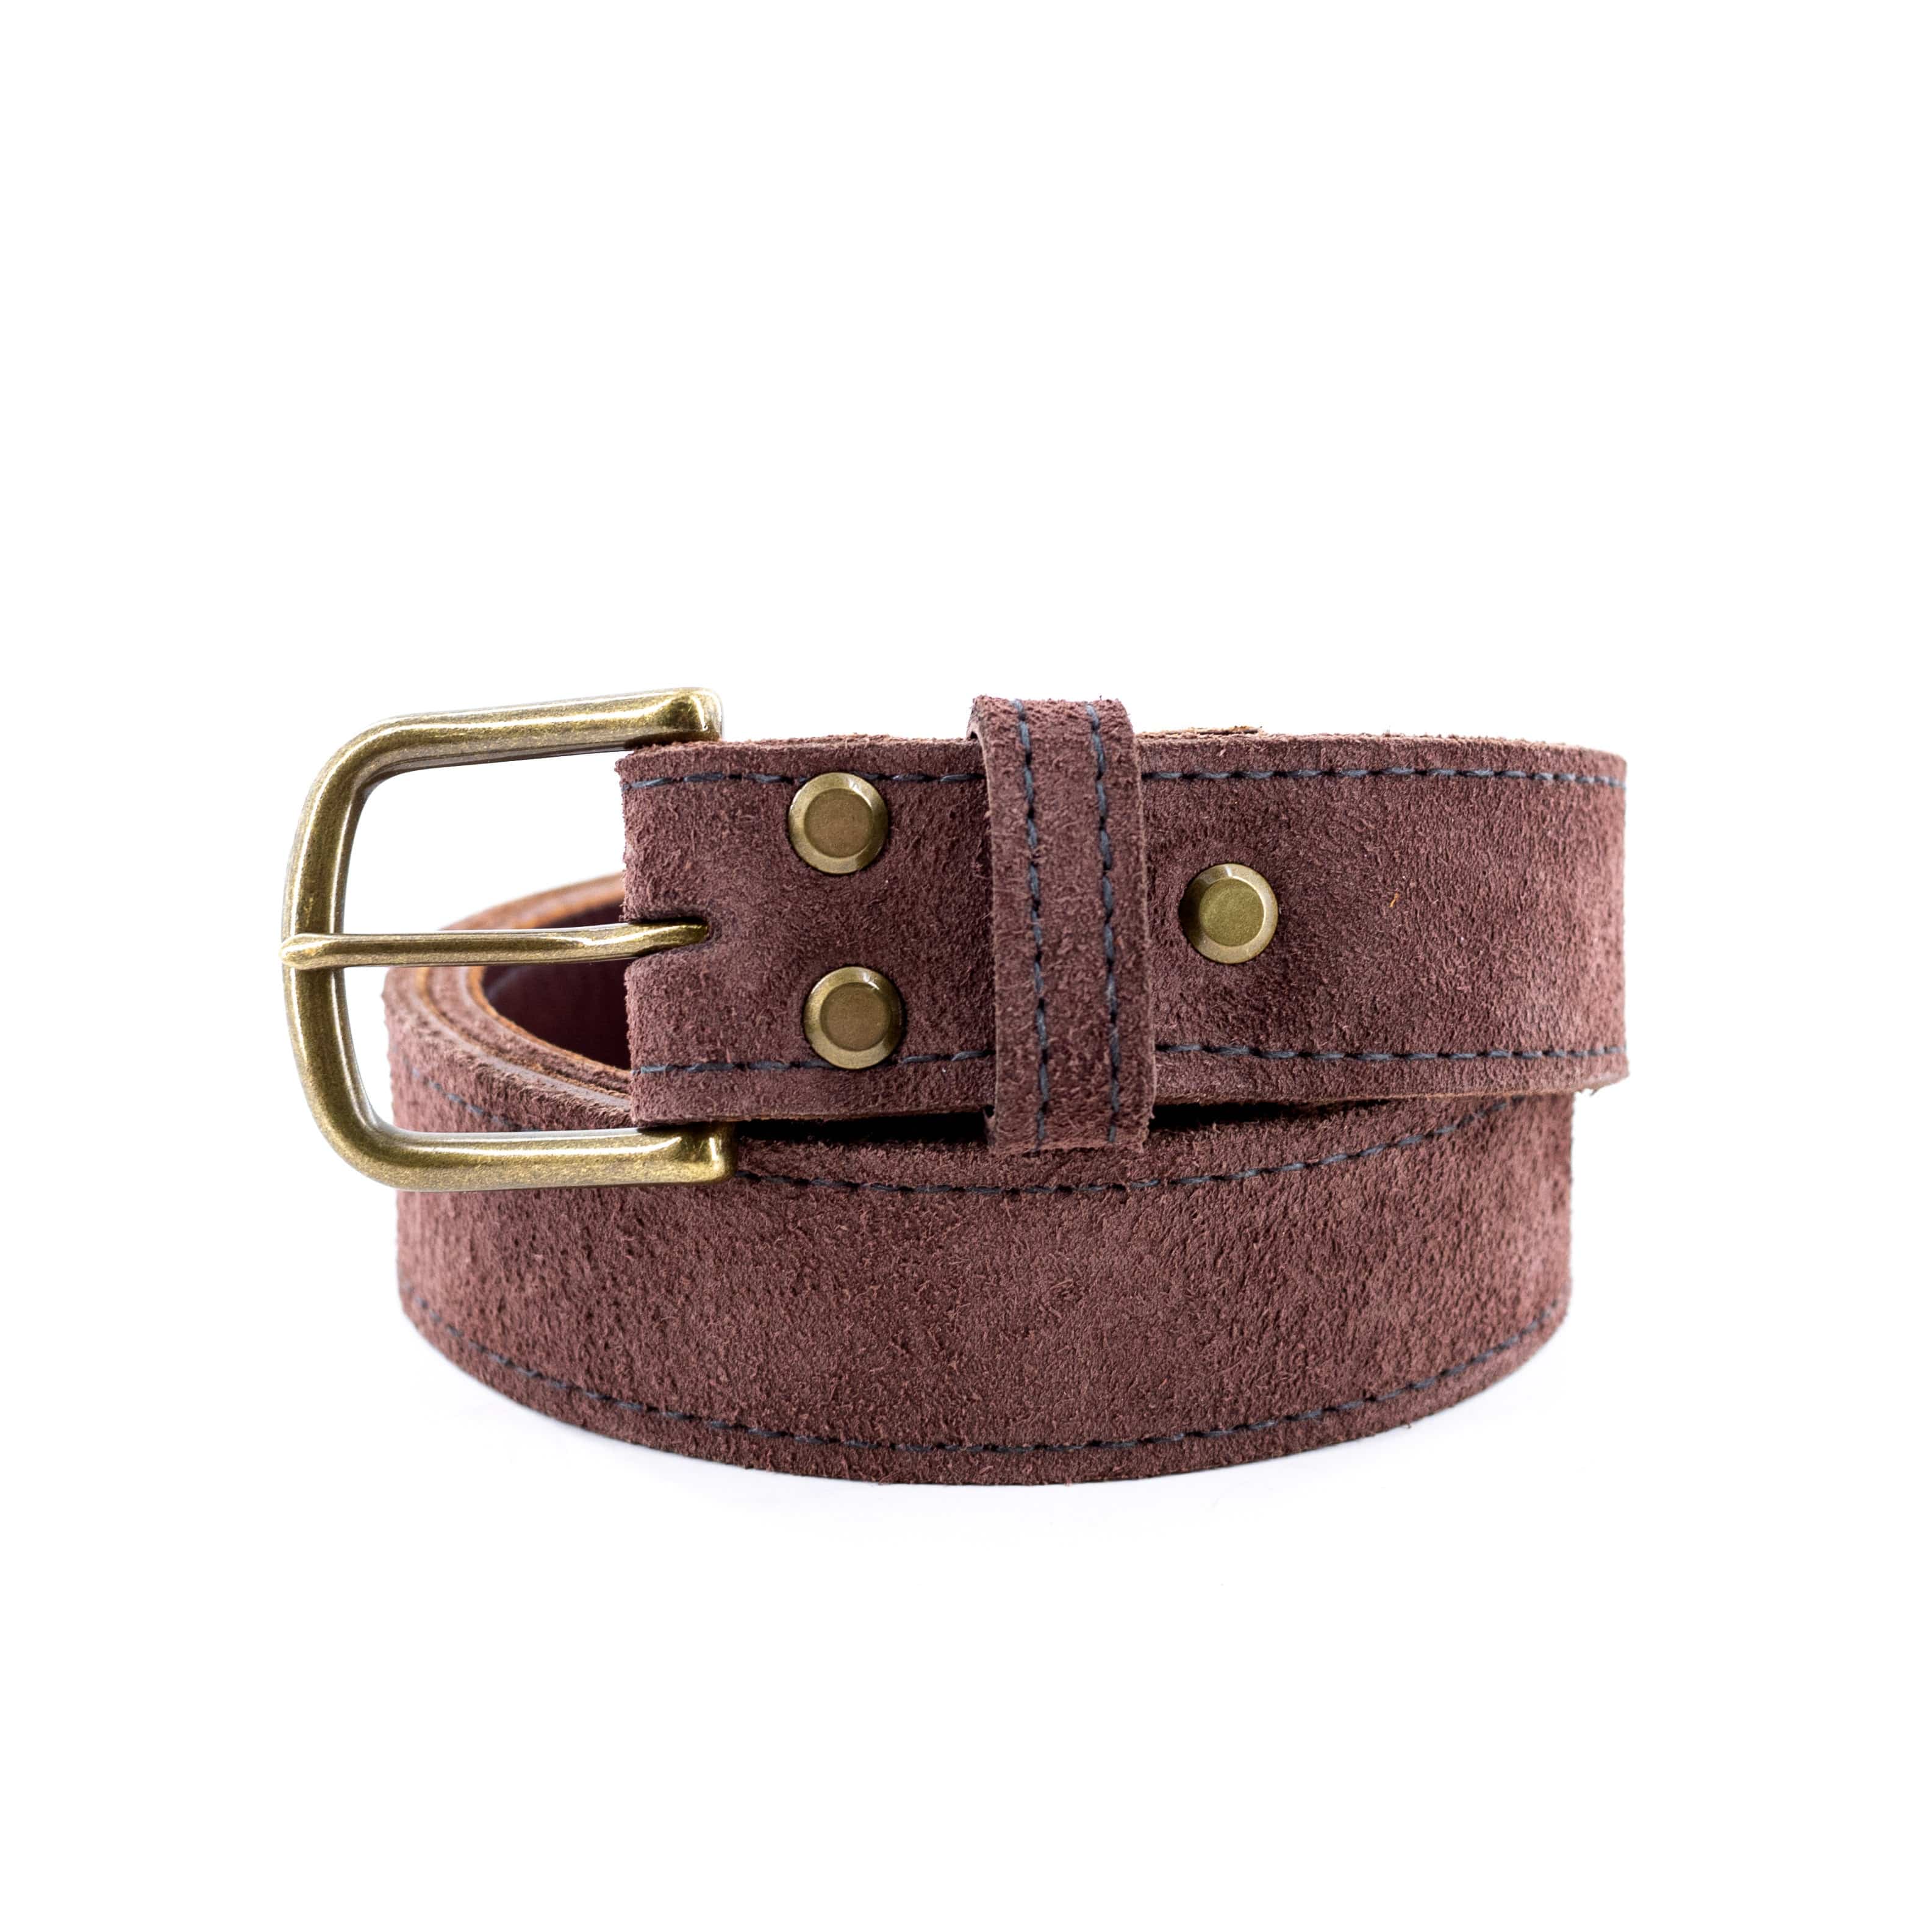 Buy Womens Genuine Leather Belt With S Buckle for USD 50.00